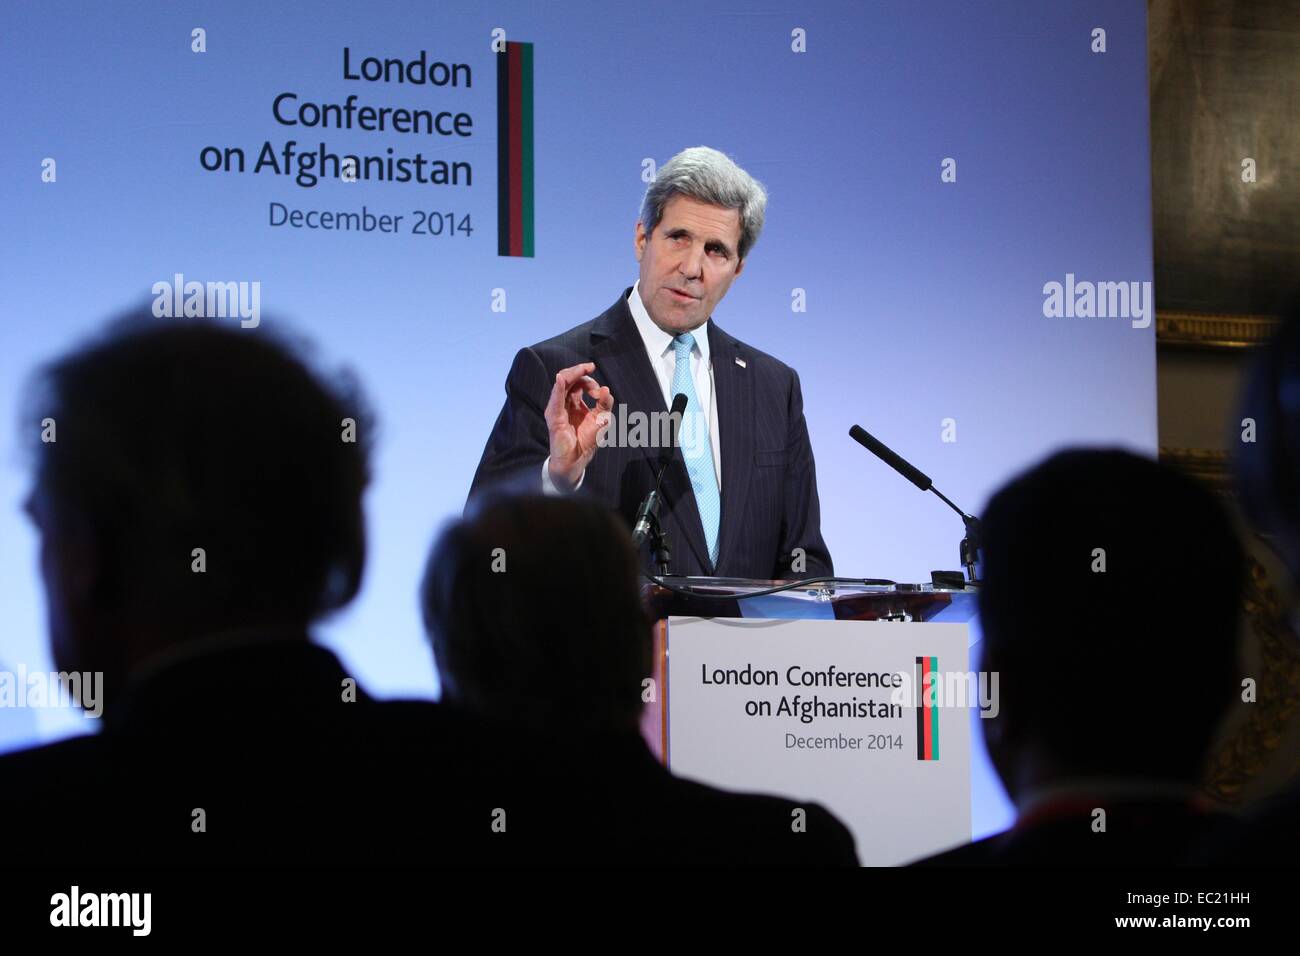 US Secretary of State John Kerry during a press conference following the London Conference on Afghanistan December 4, 2014 in London. Stock Photo